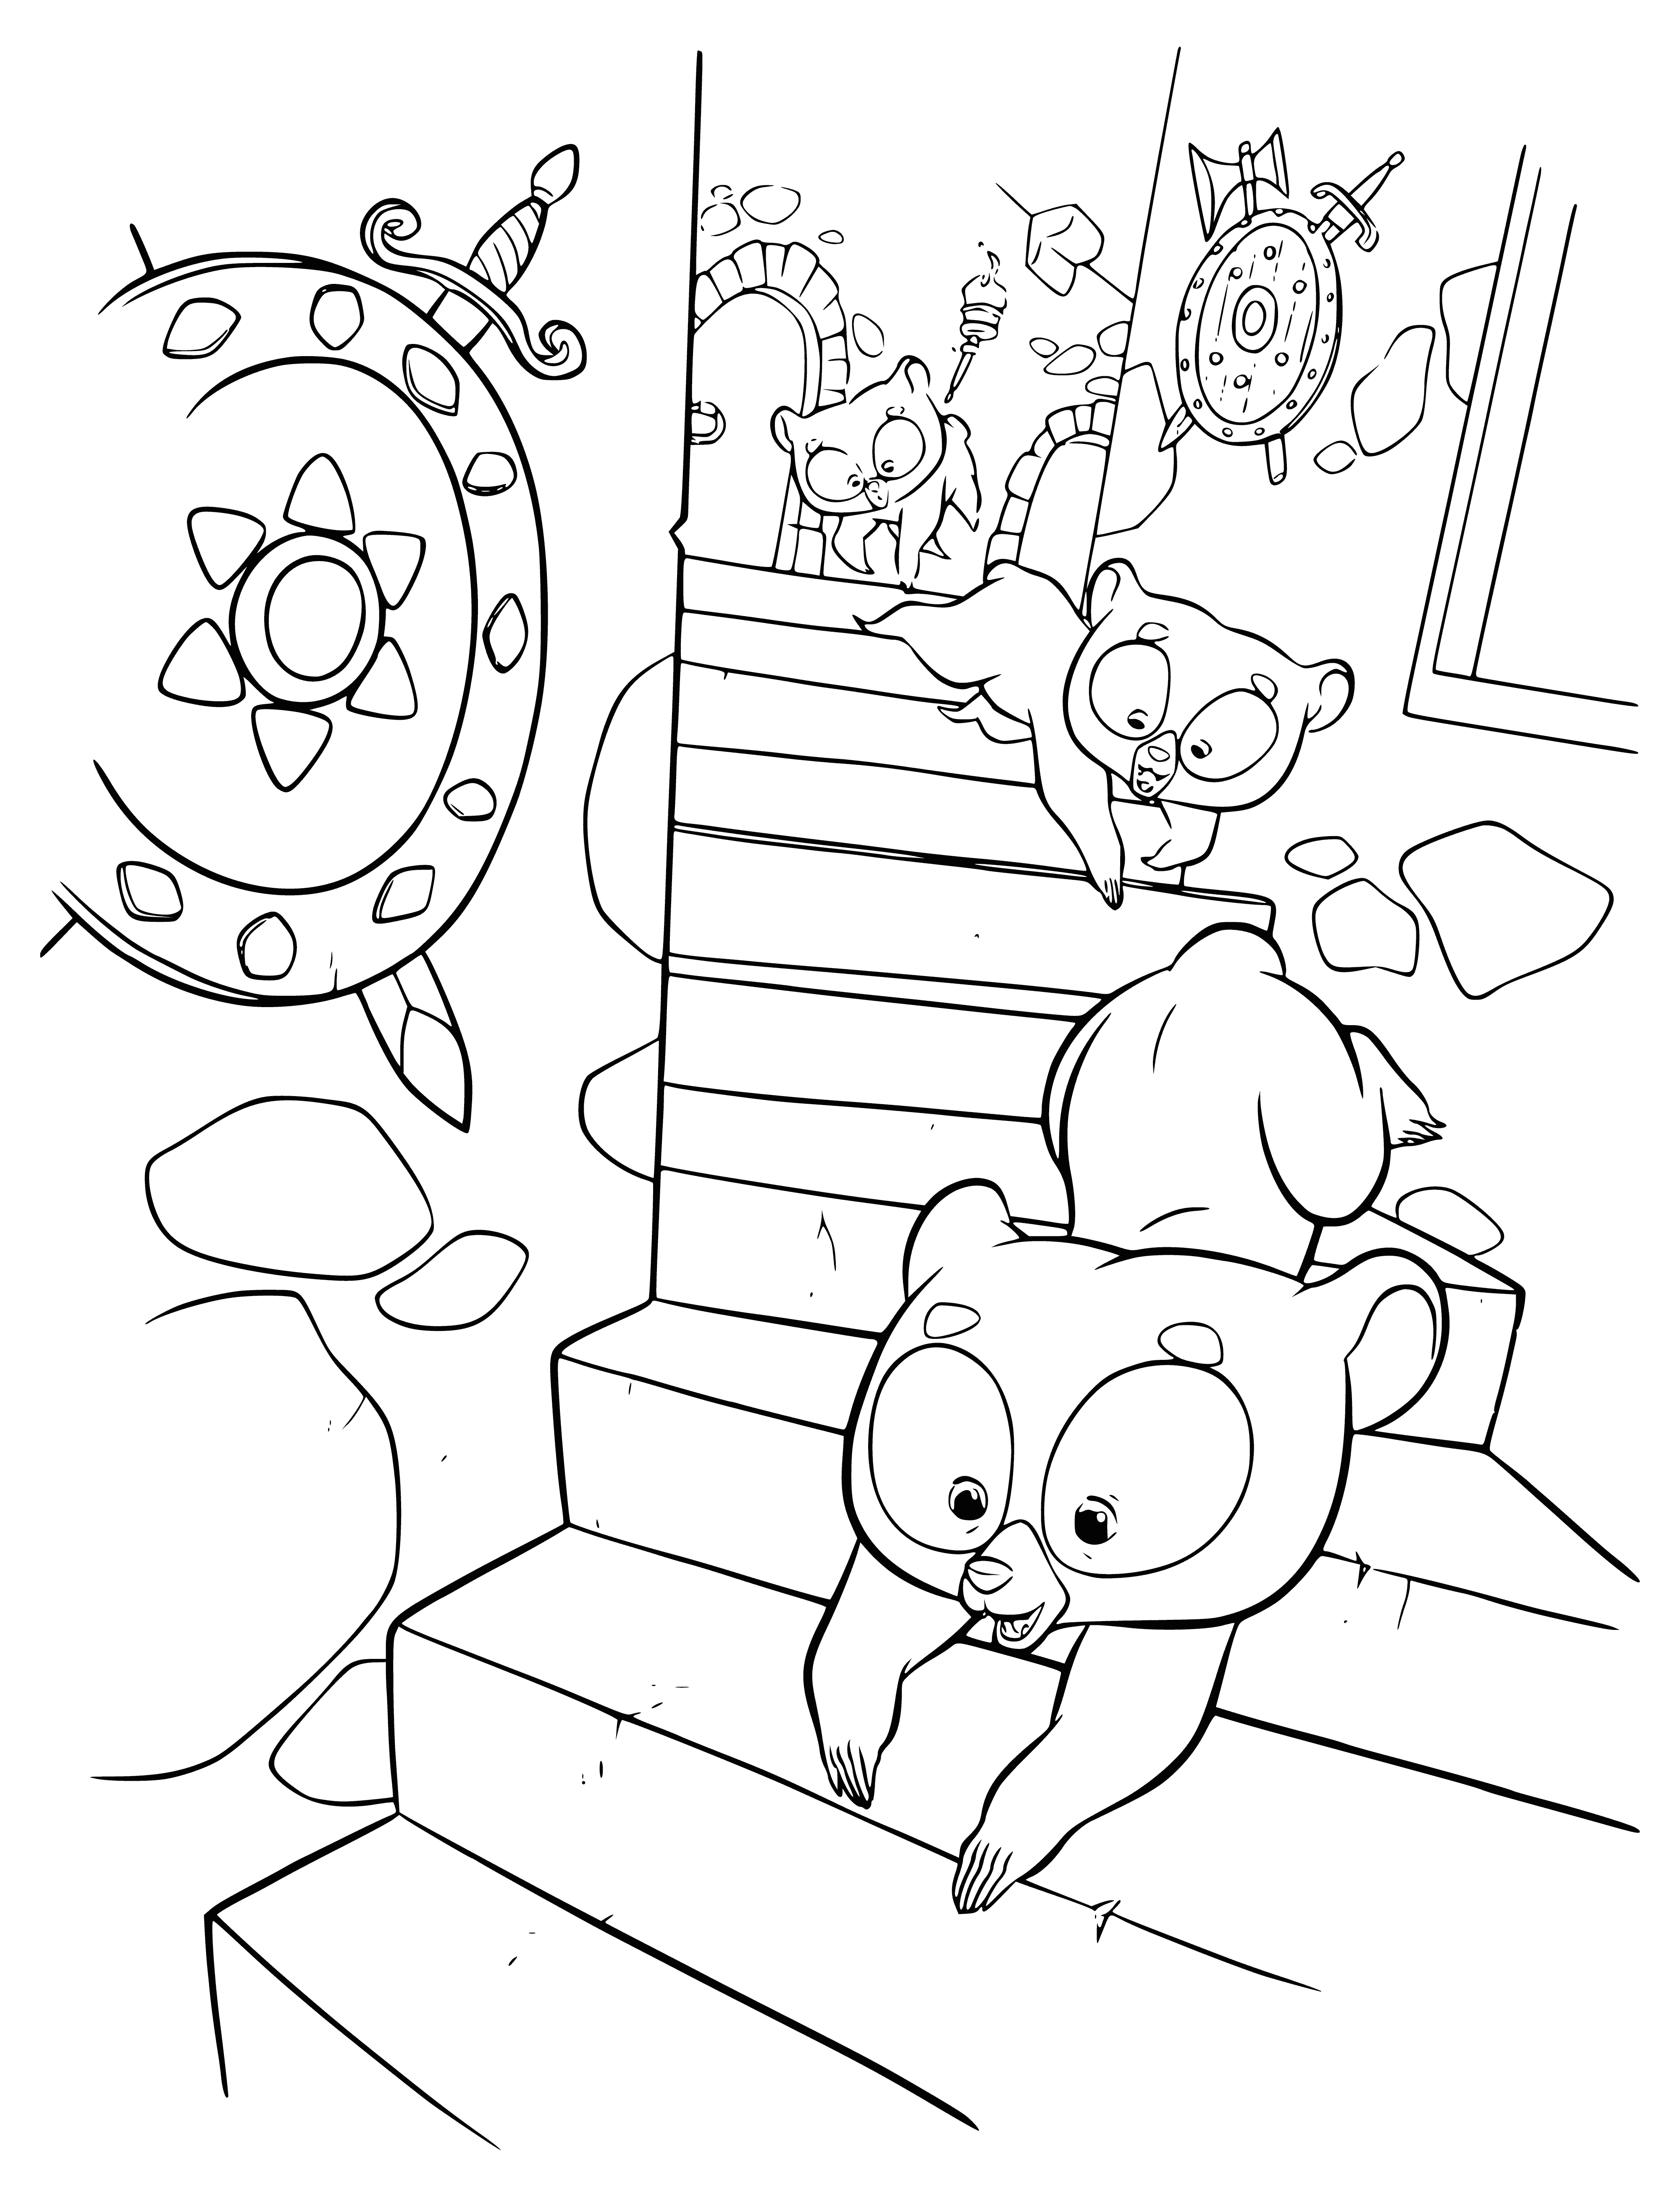 coloring page: -> Brave teddy bears on the run!